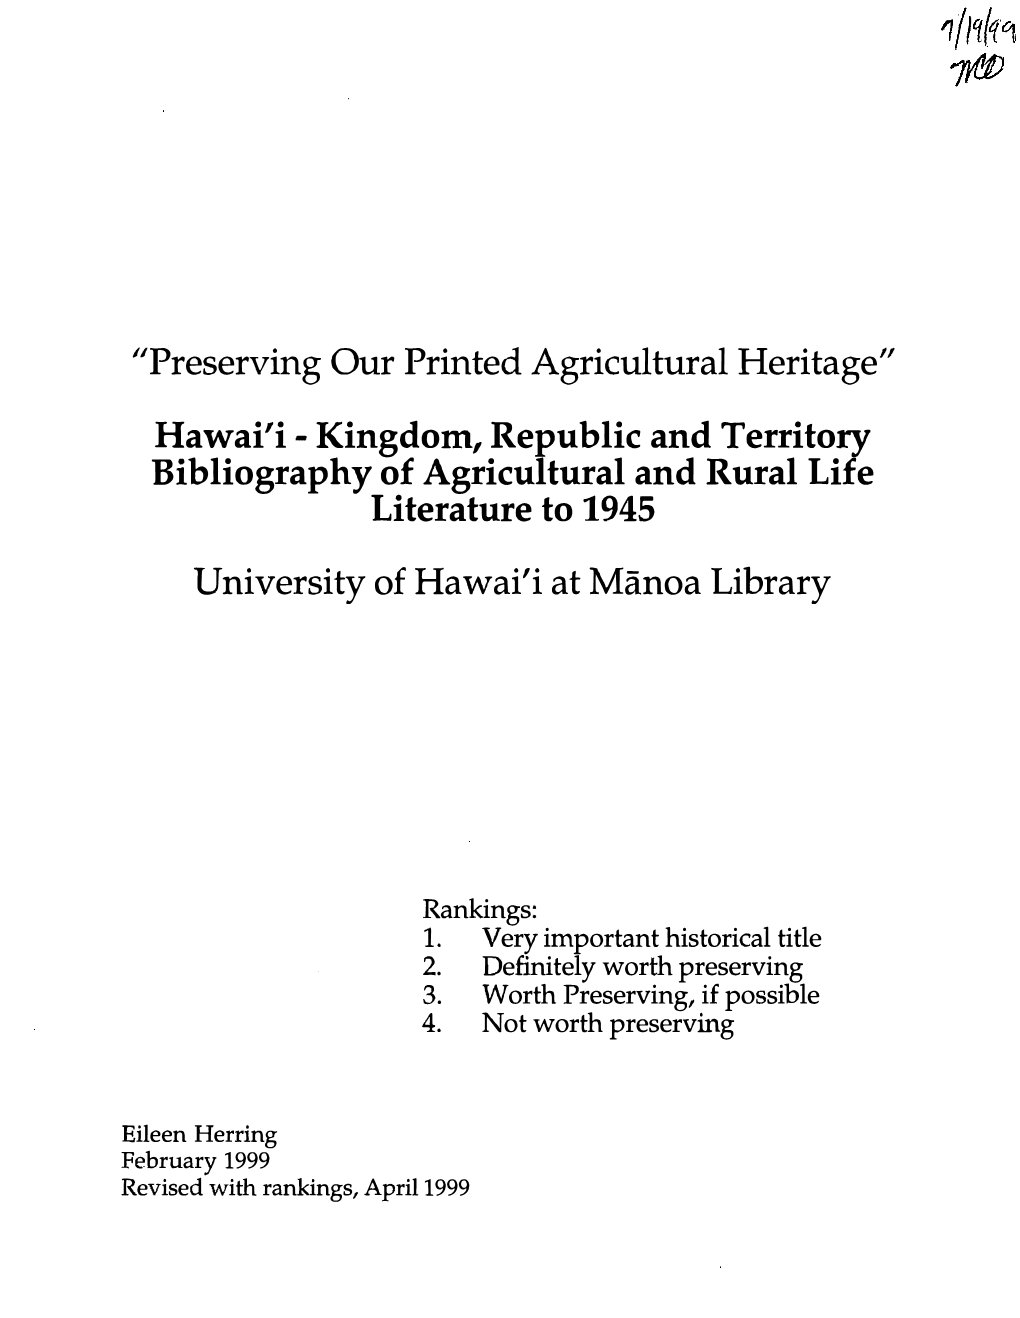 Kingdom, Republic and Territory Bibliography of Agricultural and Rural Life Literature to 1945 University of Hawai'i at Manoa Library